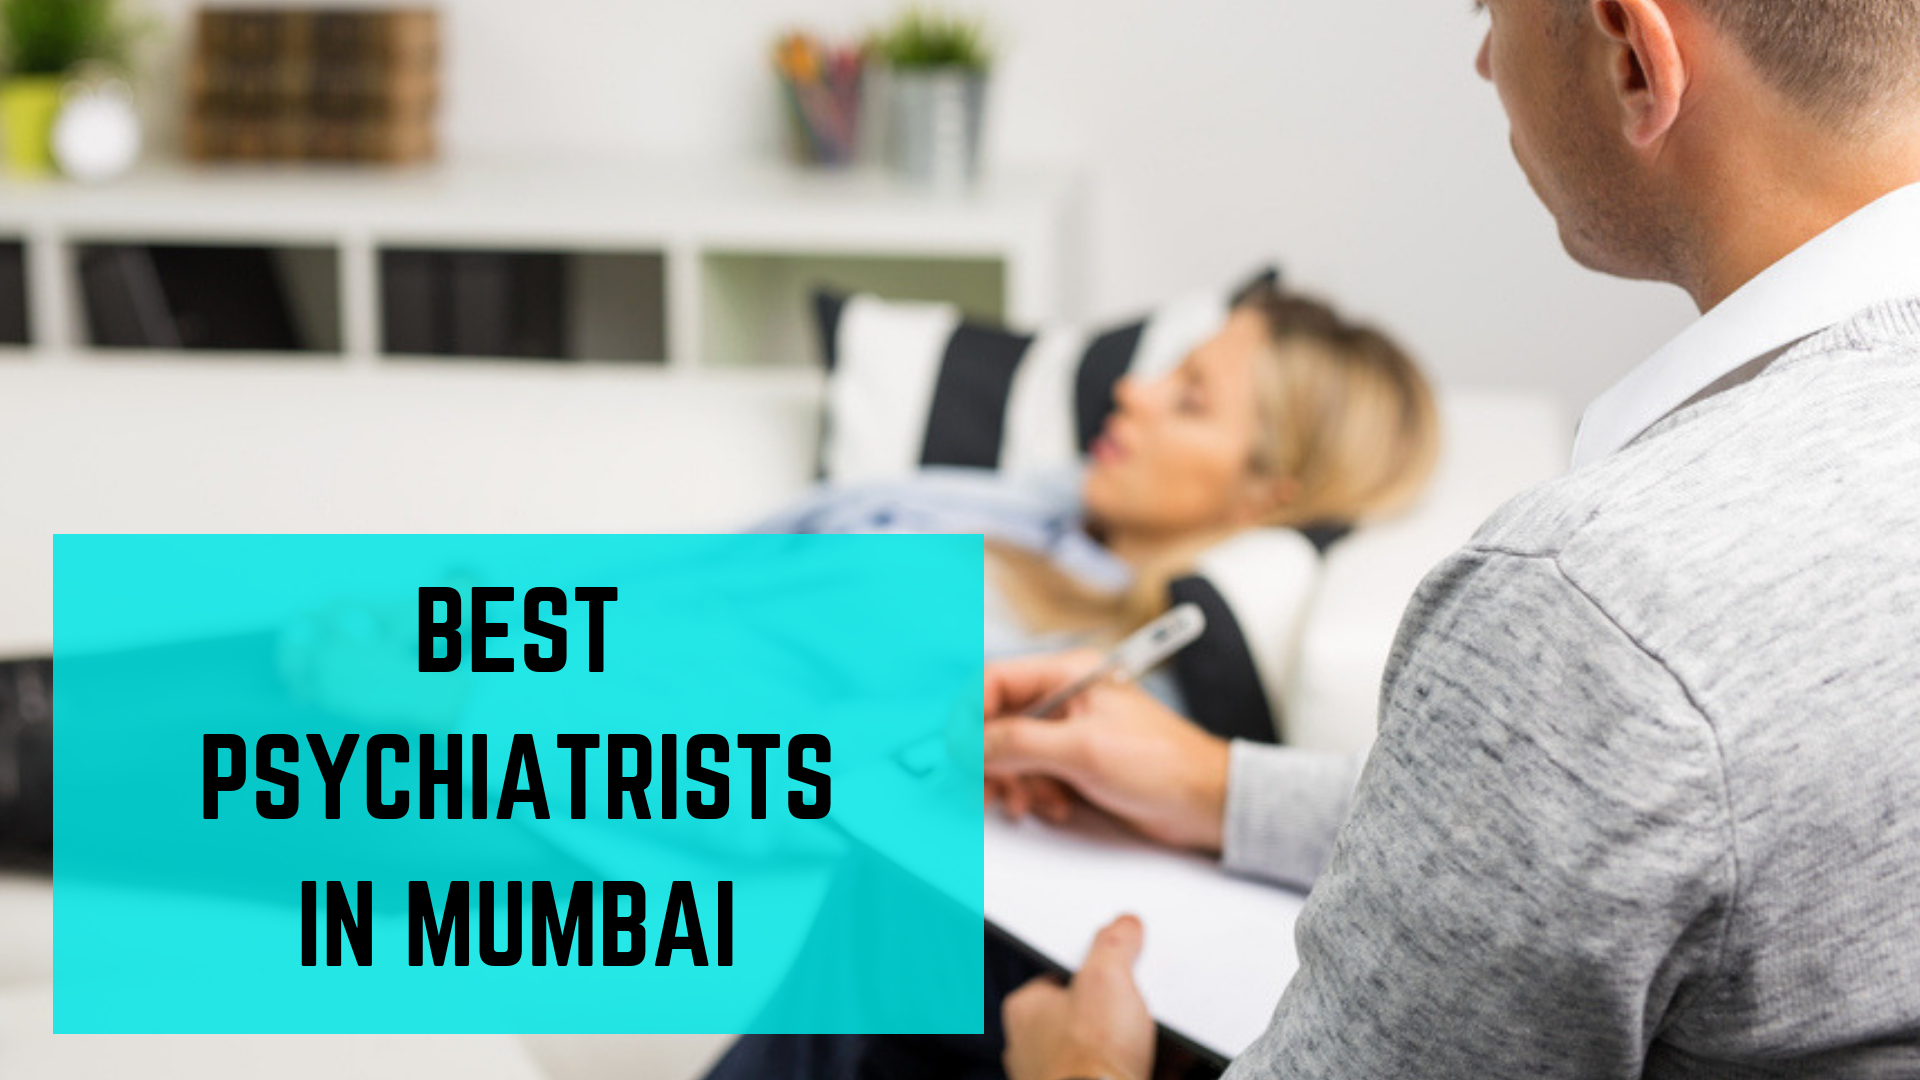 Are There Best Psychiatrist in Mumbai Specializing in Bipolar Disorder